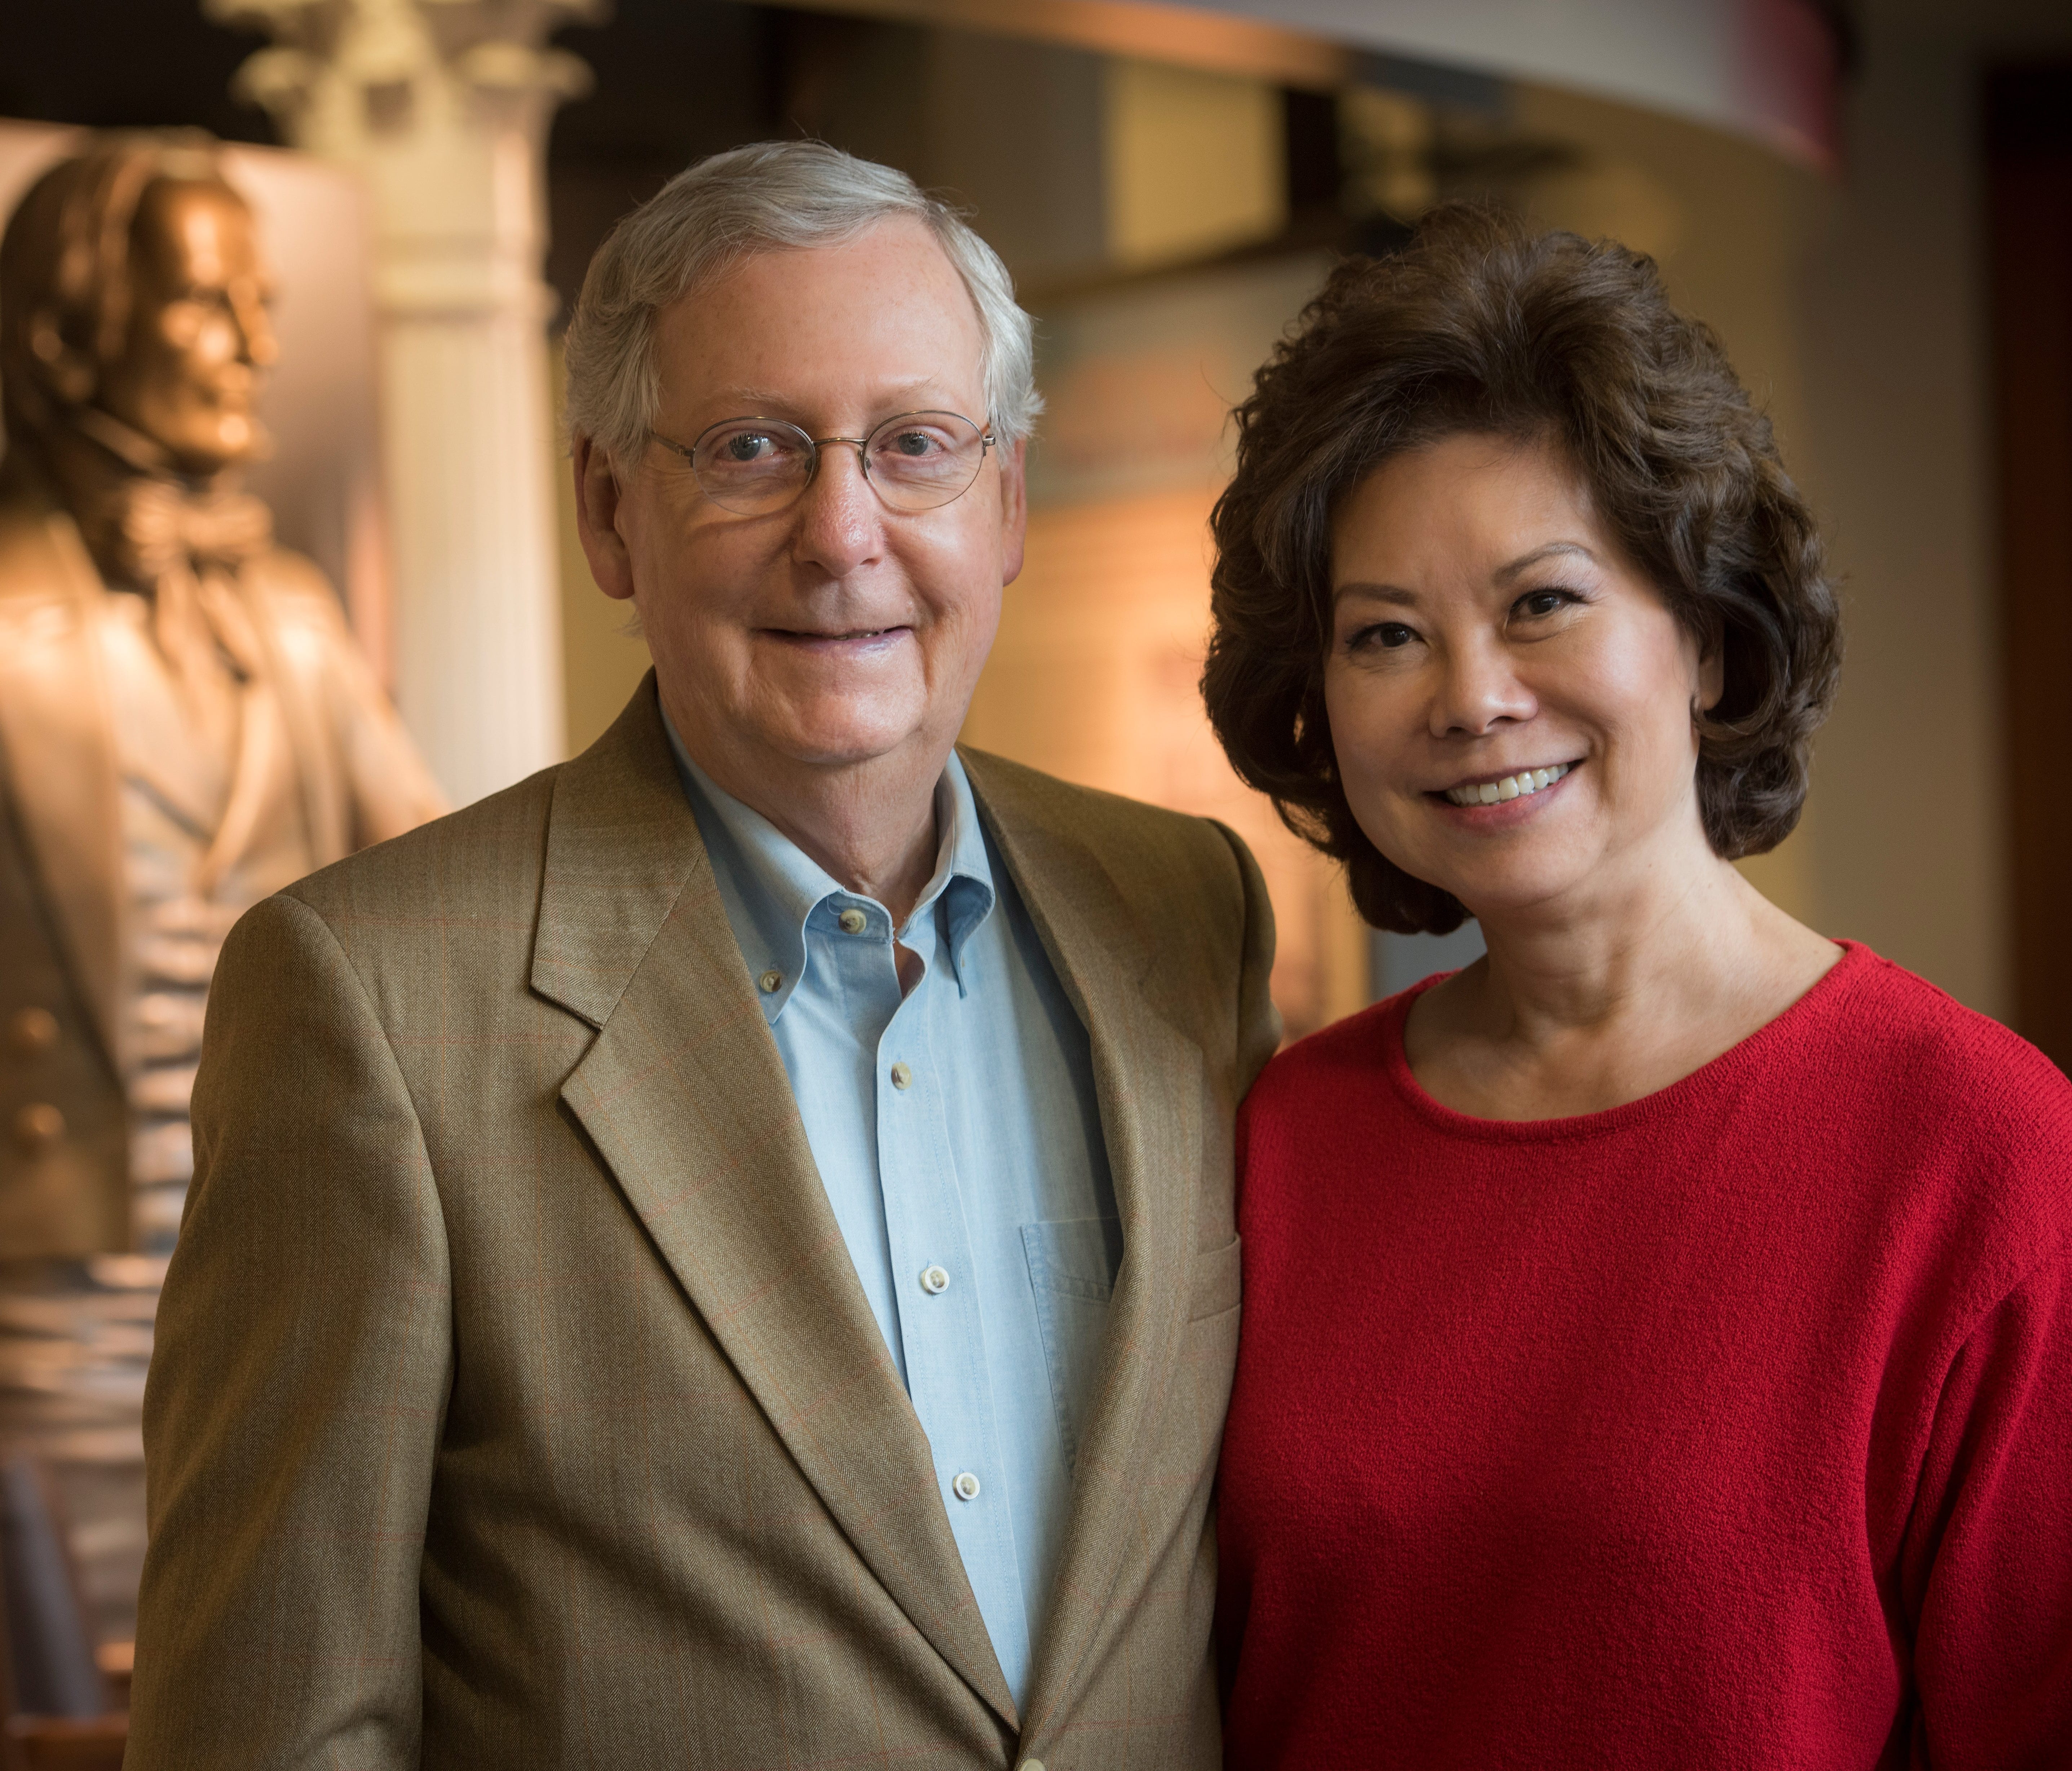 Senate Majority Leader Mitch McConnell, R-Ky., with his wife, former Labor Secretary Elaine Chao at the McConnell-Chao Archives at the University of Louisville. on May 20, 2016.